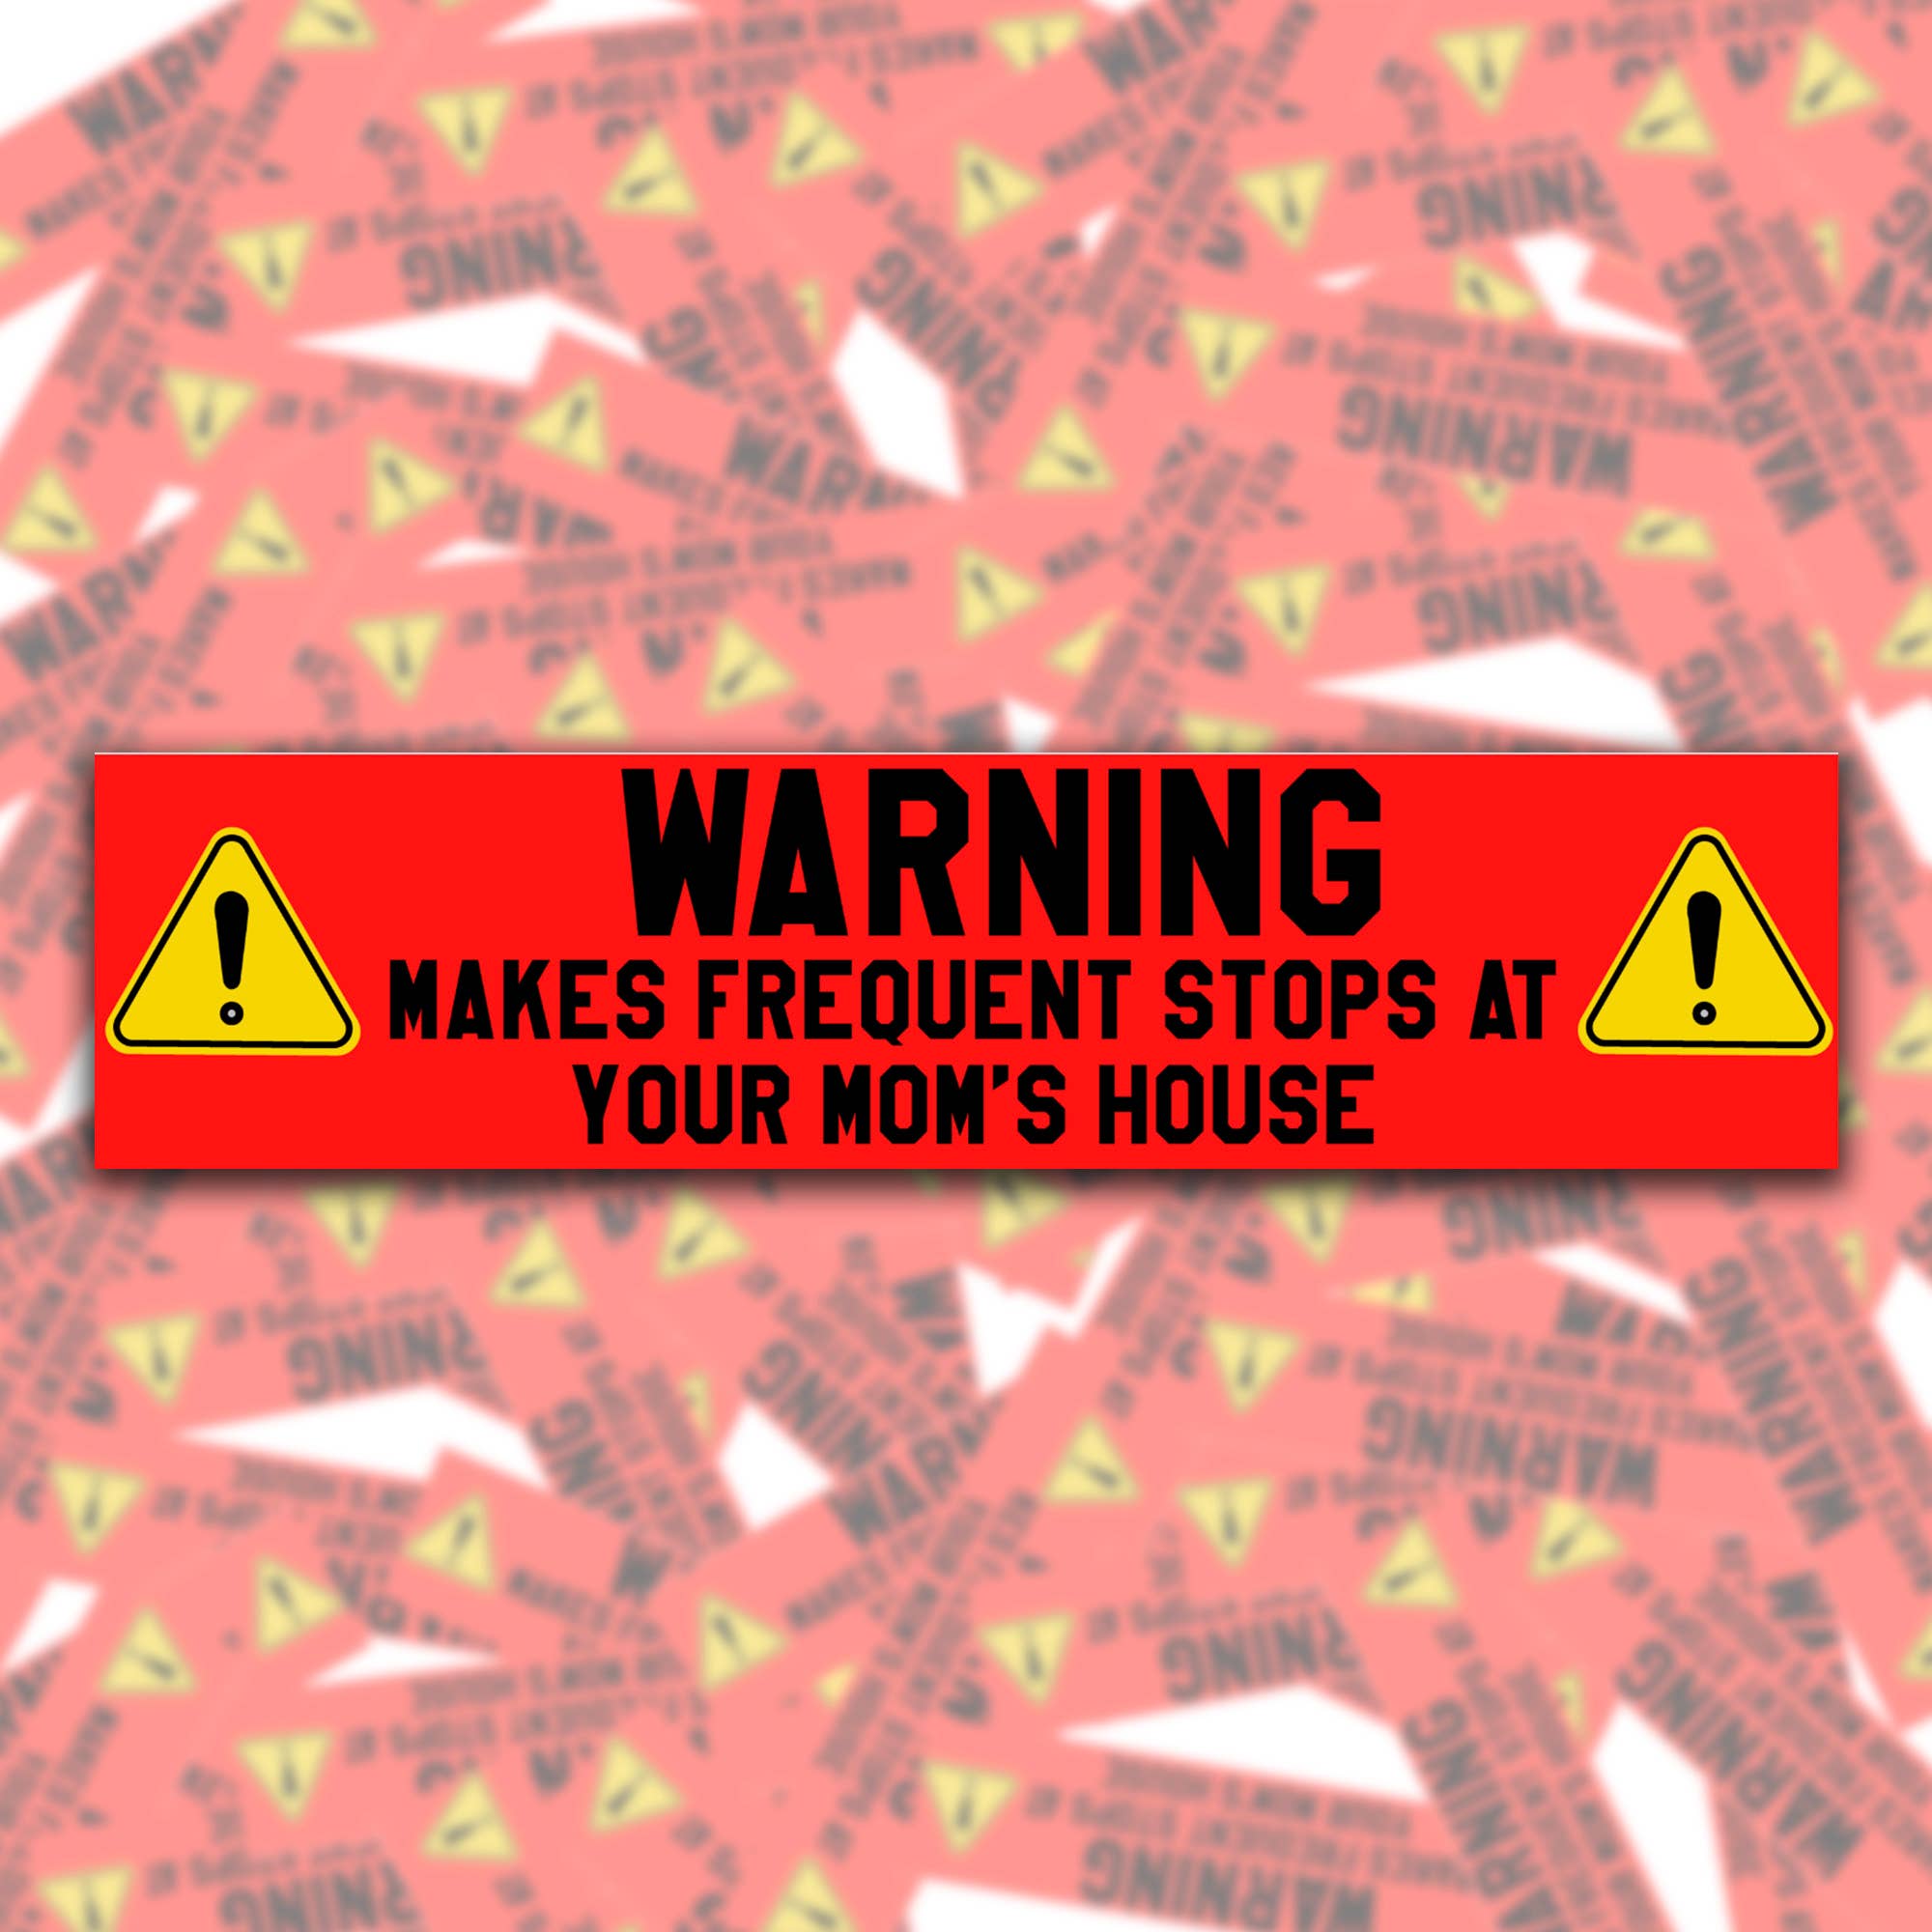 Warning Makes Frequent Stops At Mom's House Bumper Sticker